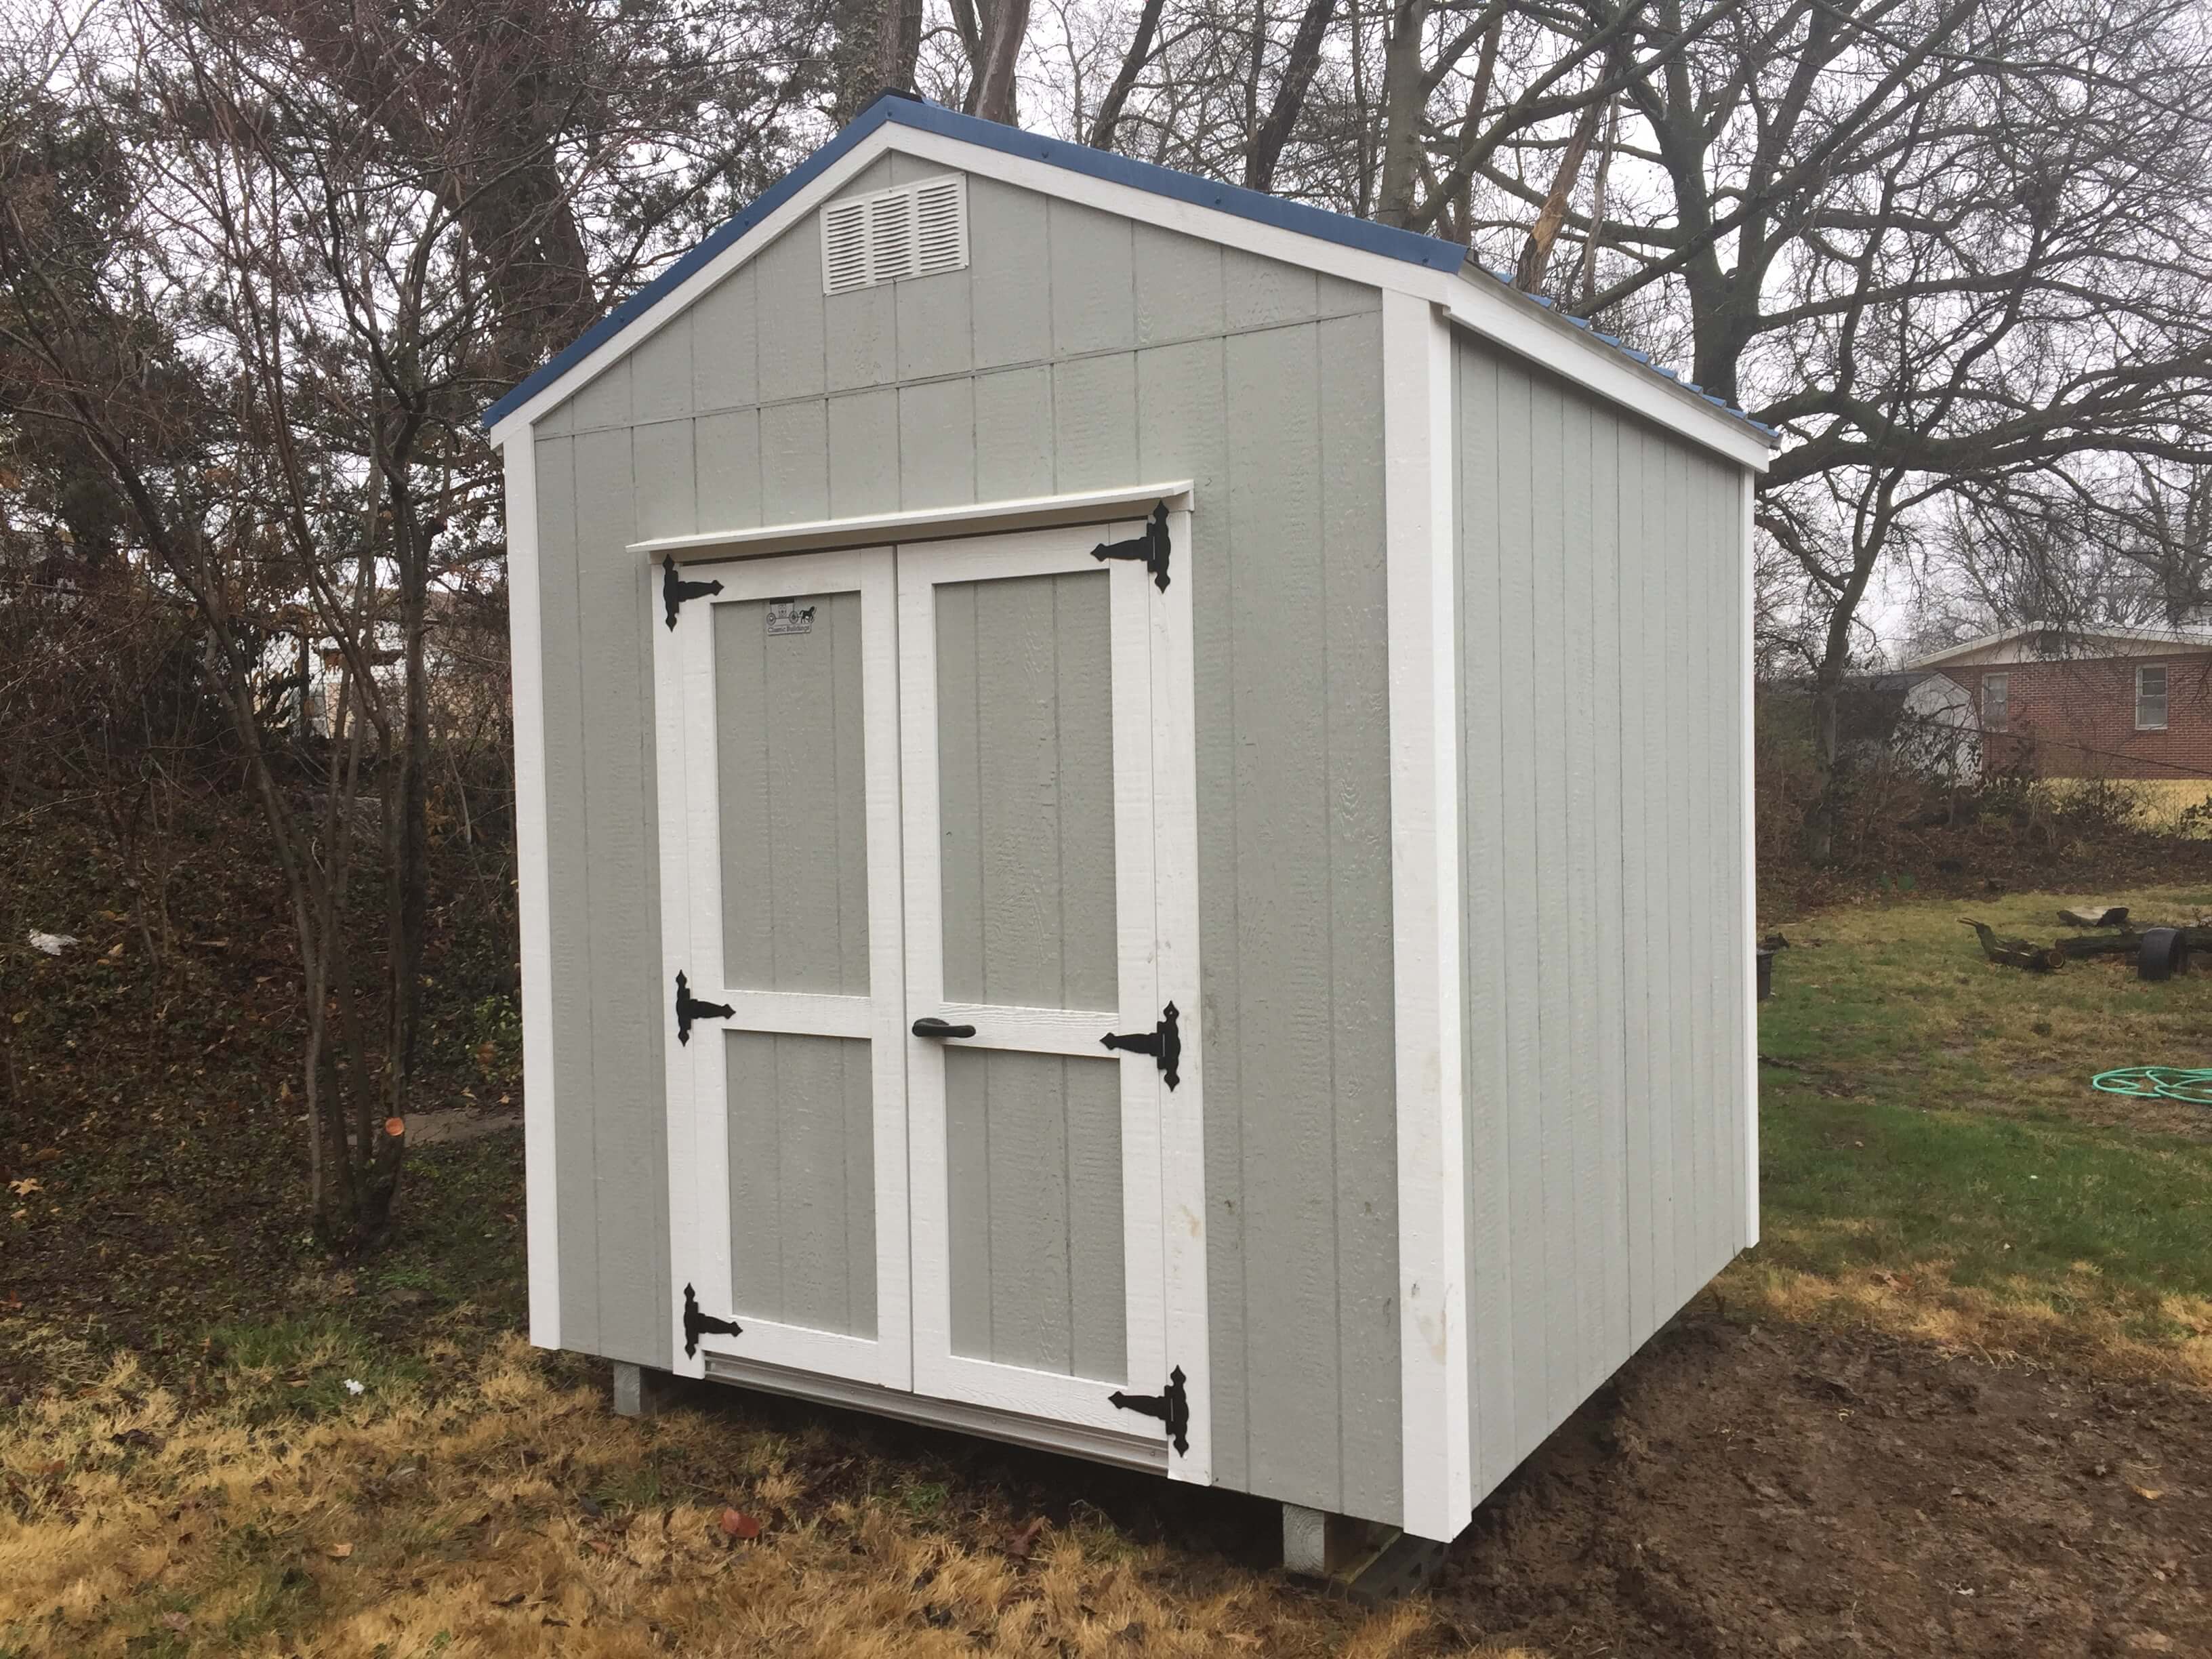 Utility Shed